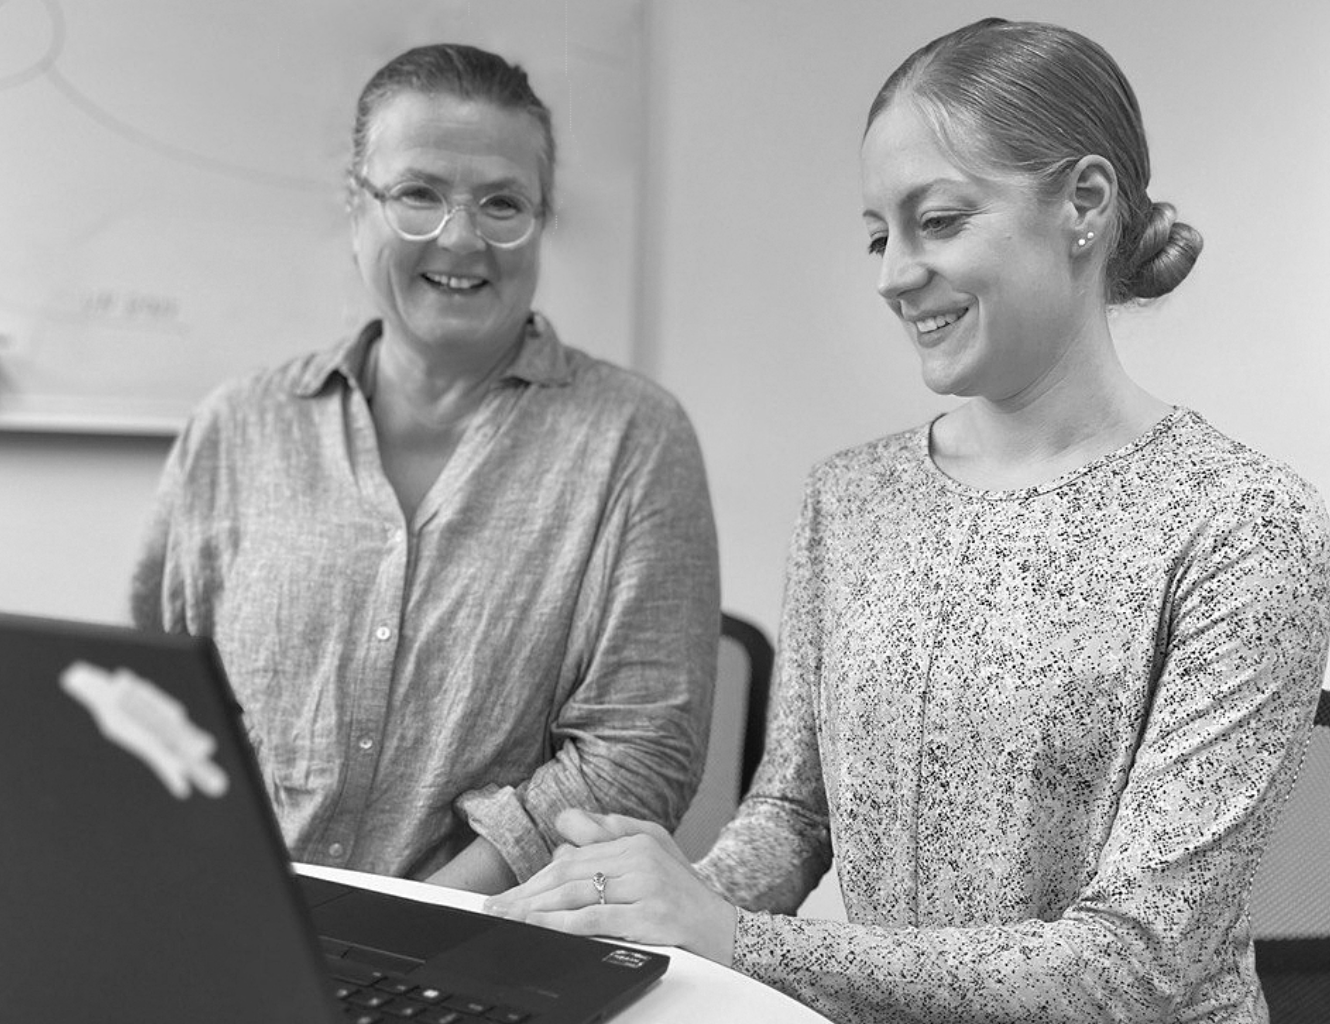 Anne Herms and Susanne Hölzemann on the daily life in the SCIoI Finance and HR department